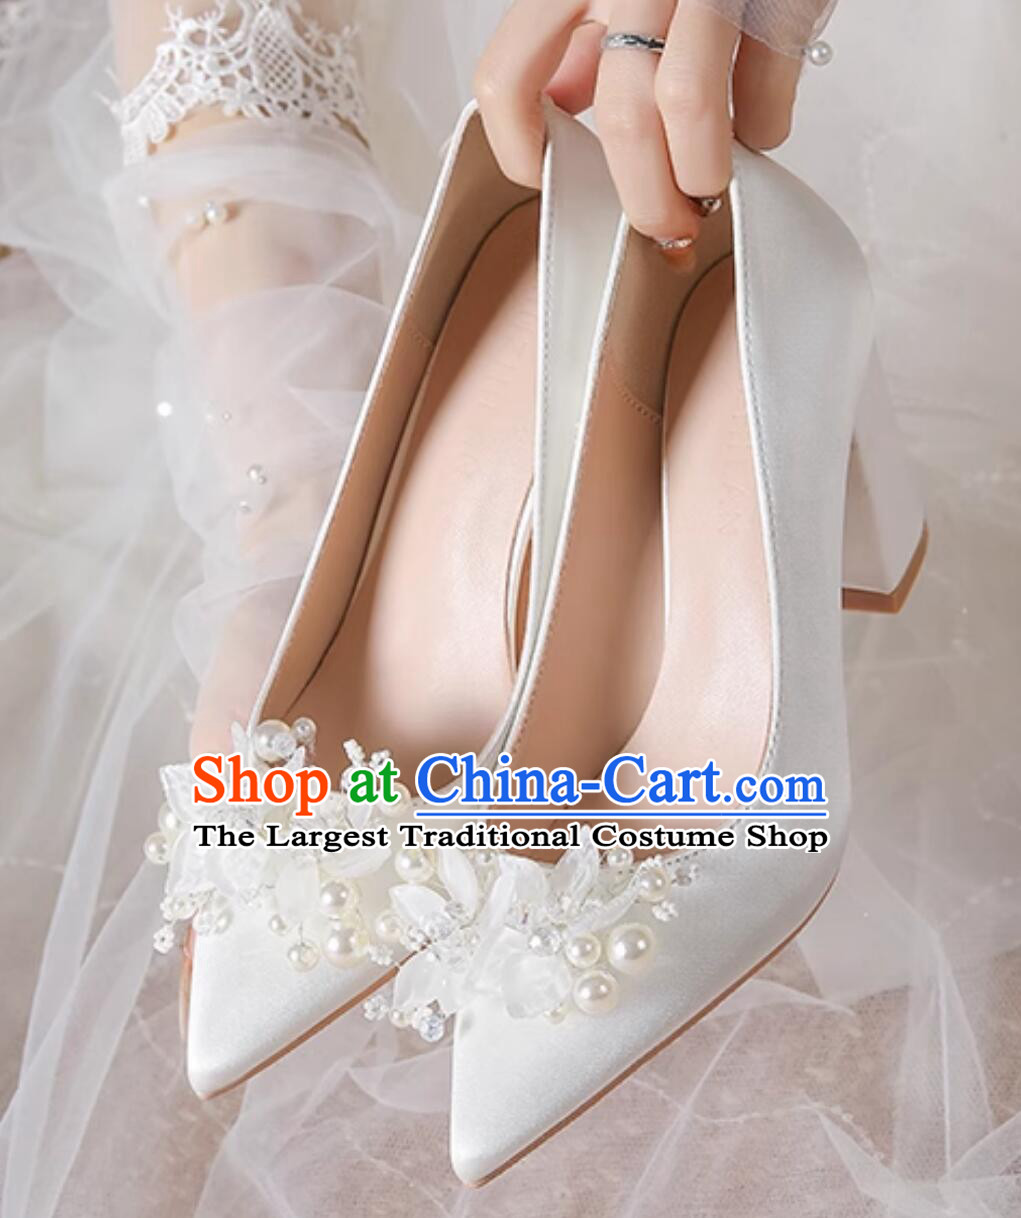 Top cm Heeled Shoes Bride Shoes White Wedding Shoes French Fashion Shoes